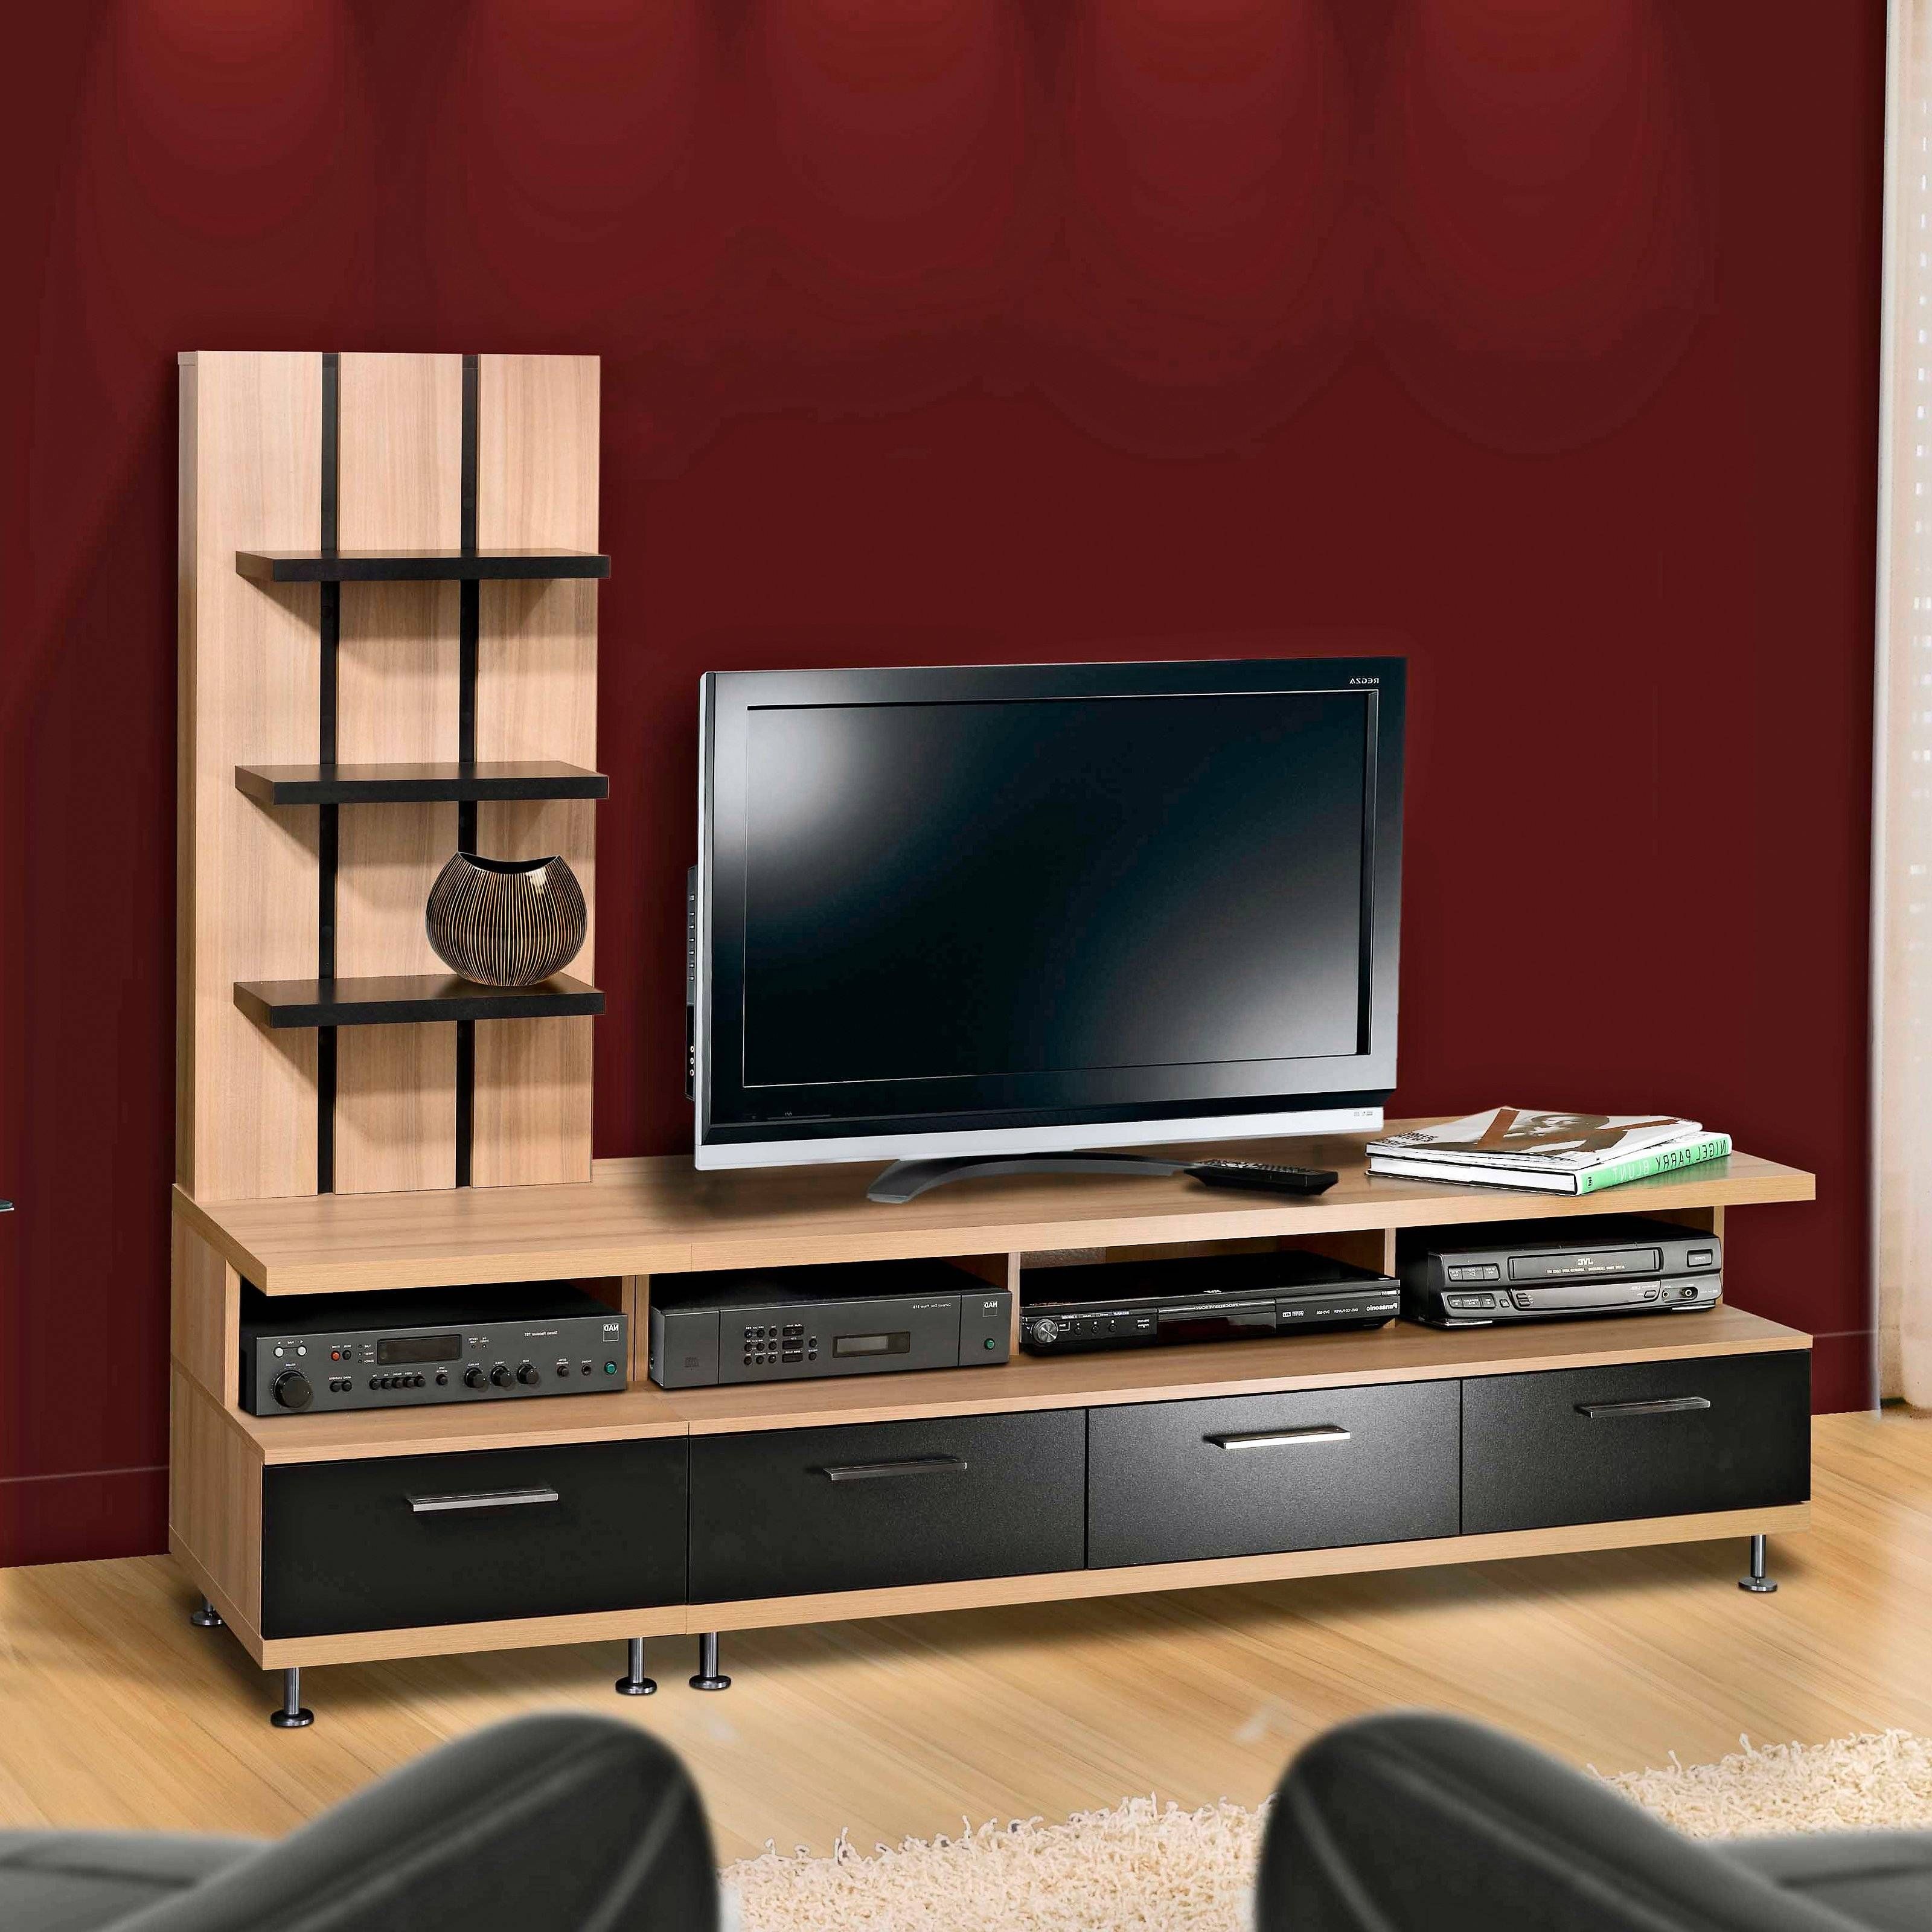 15 Best Collection of Modern Tv Stands for Flat Screens